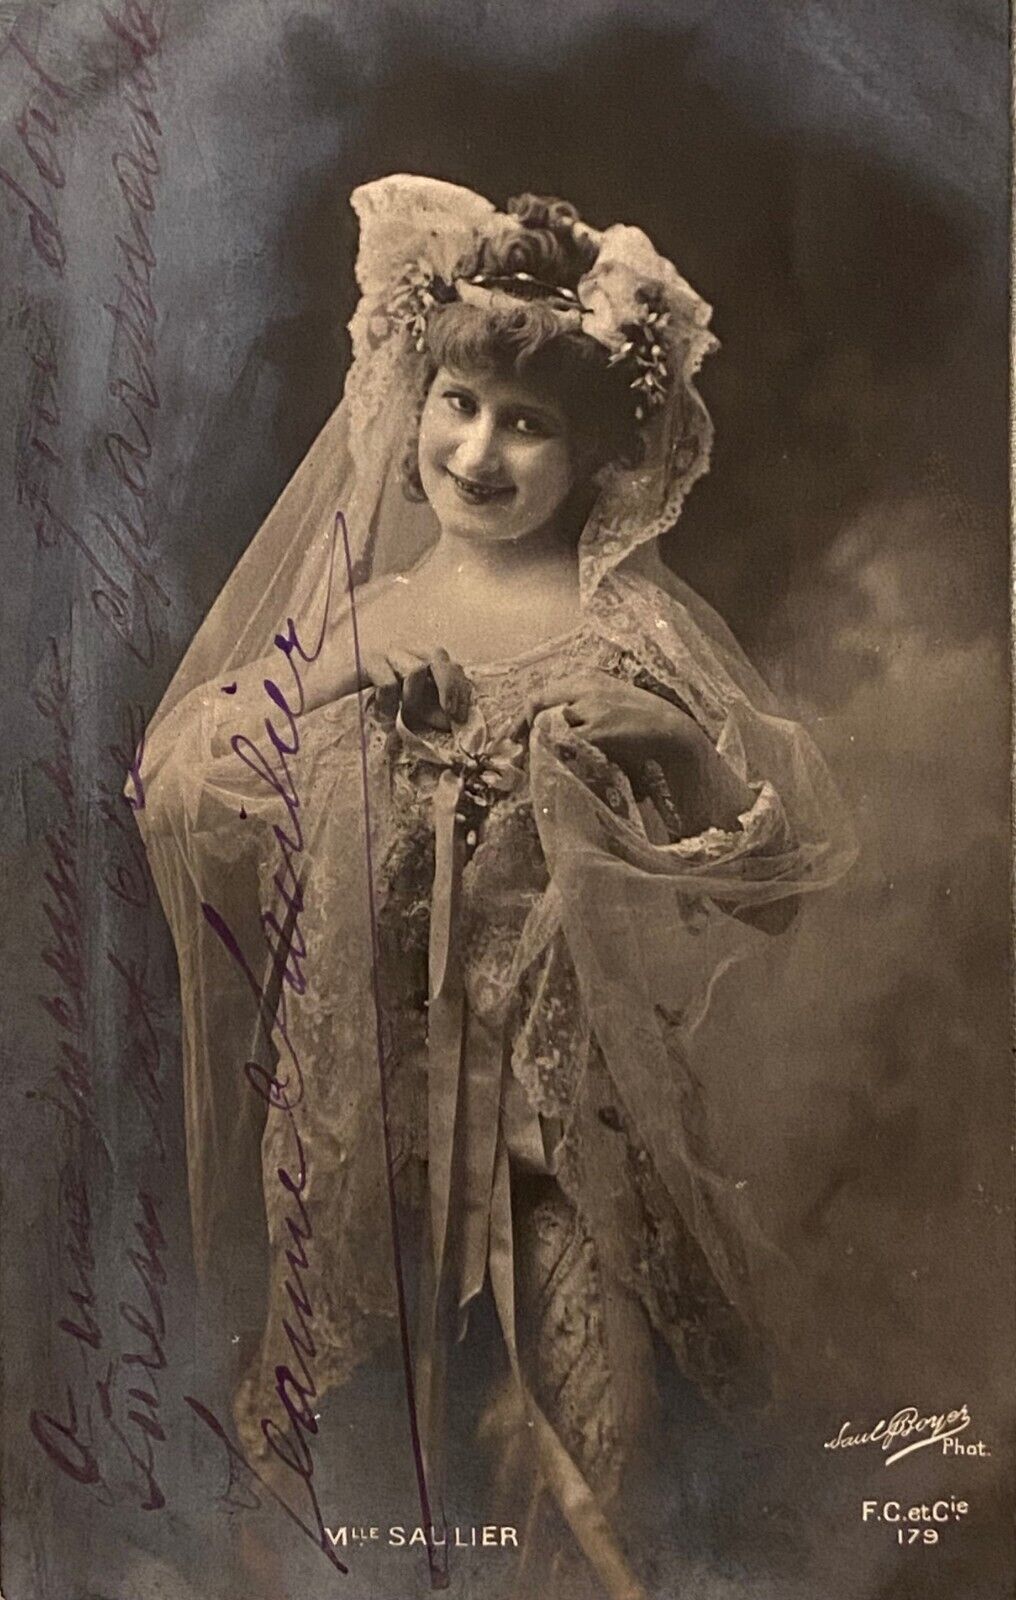 CPA Photo - Miss SALLIER (1874-1943) - Actress with shipment.